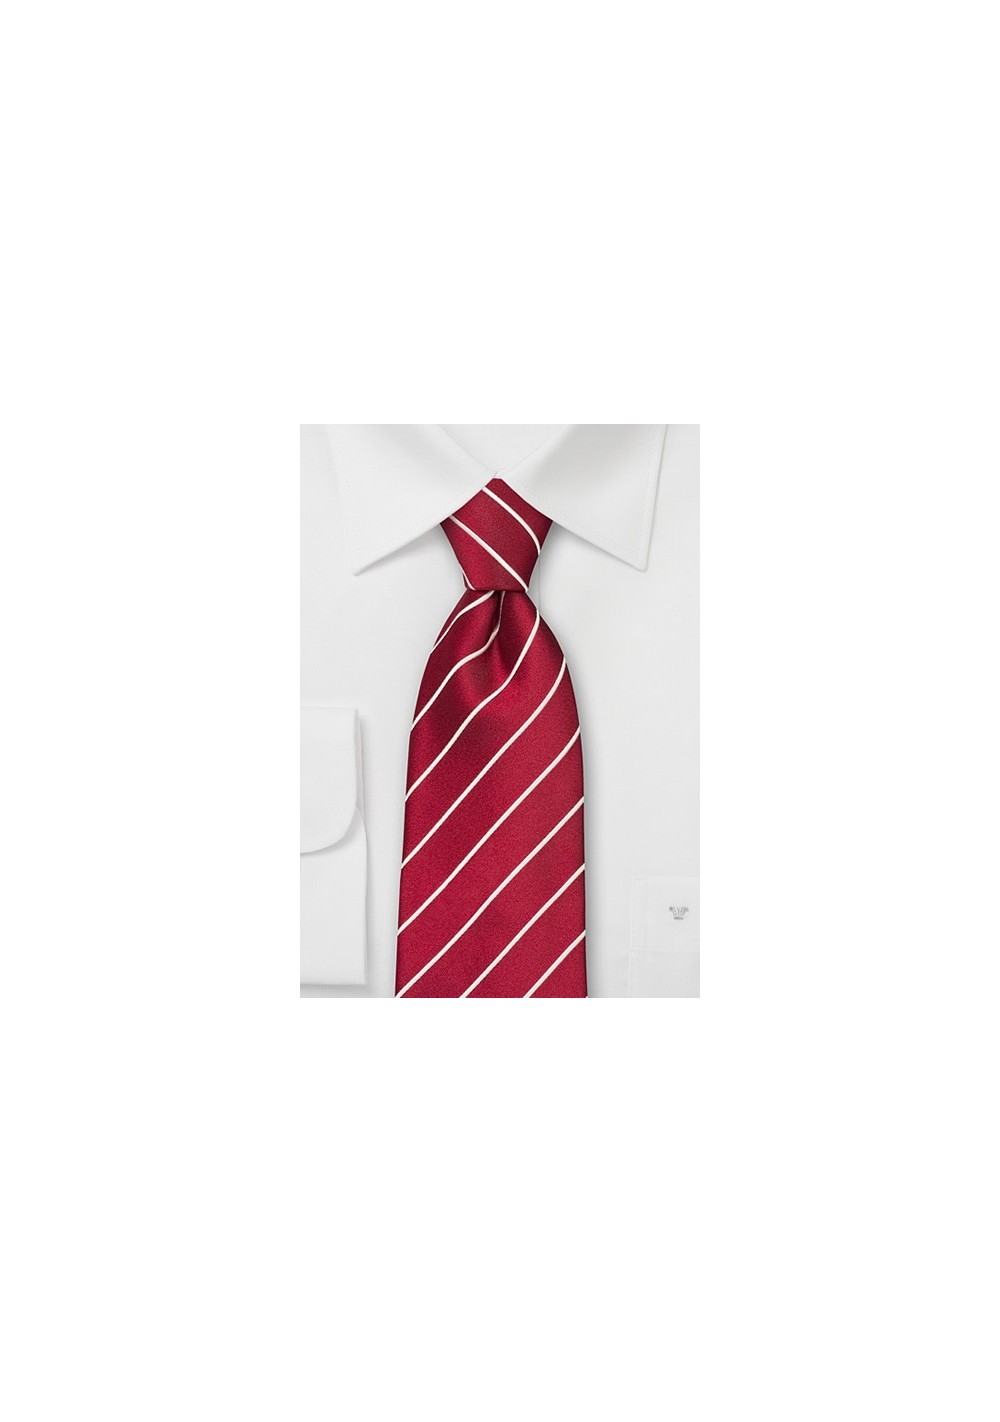 Extra long ties - Deep red striped necktie in XL